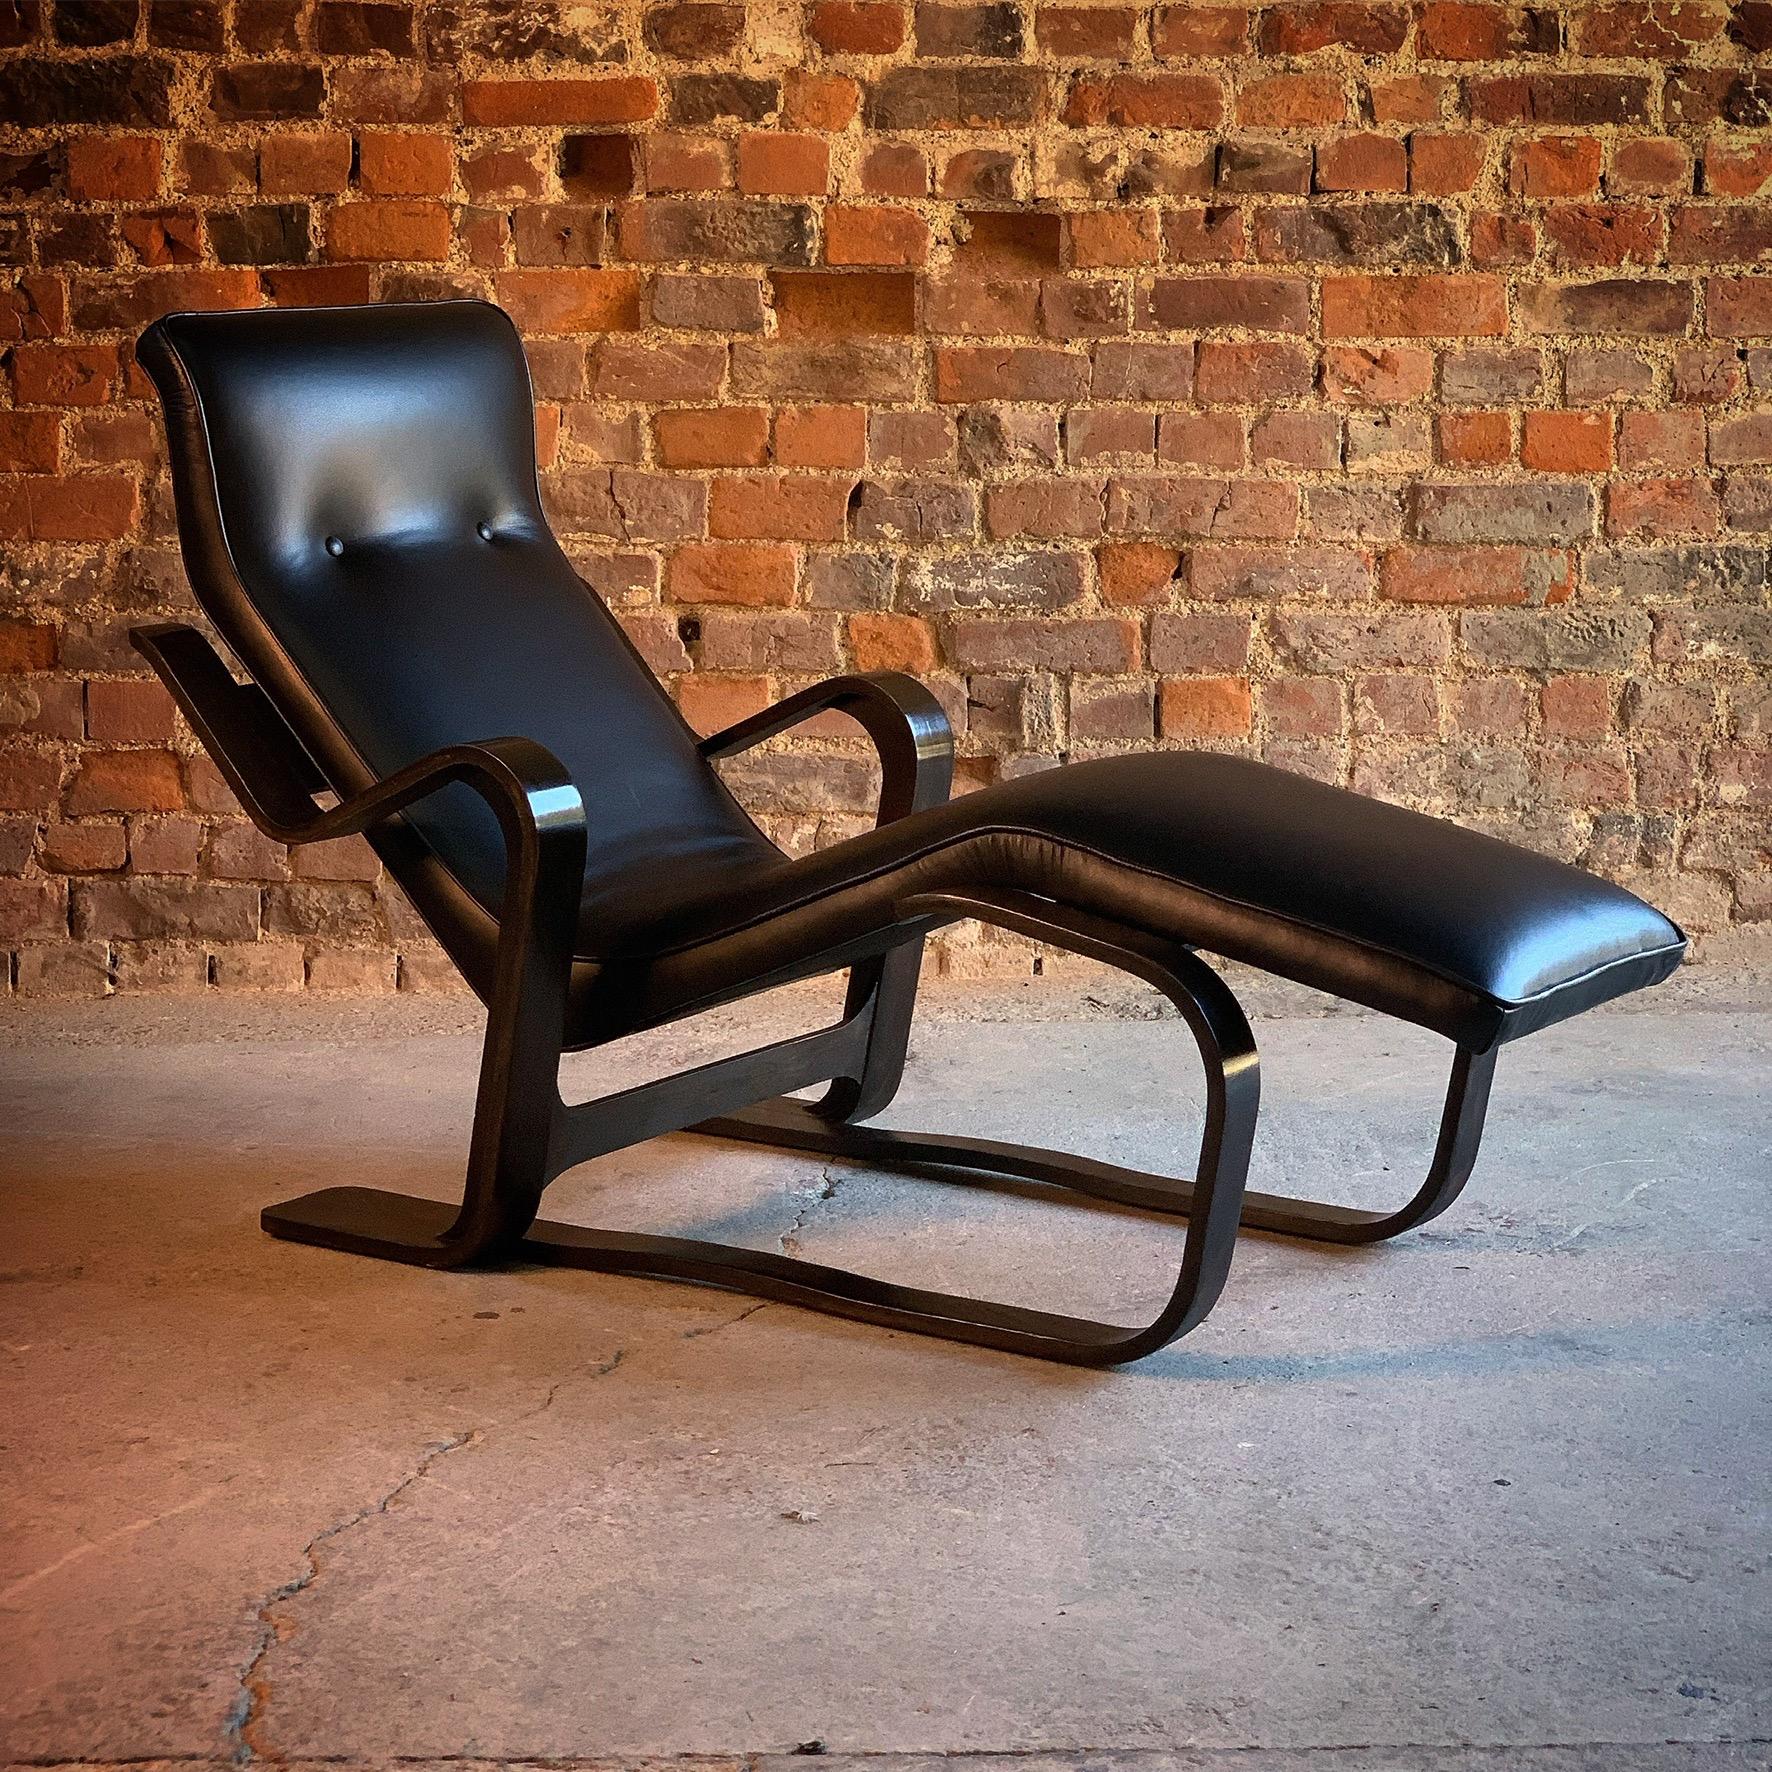 Marcel Breuer long chair chaise Lounge by Isokon, circa 1970 Bauhaus

Marcel Breuer 'Long Chair' ebonized bent ply with black leather seat pad by Isokon circa 1970s, the ‘Long chair’, with its bent frame of laminated birch wood supporting the